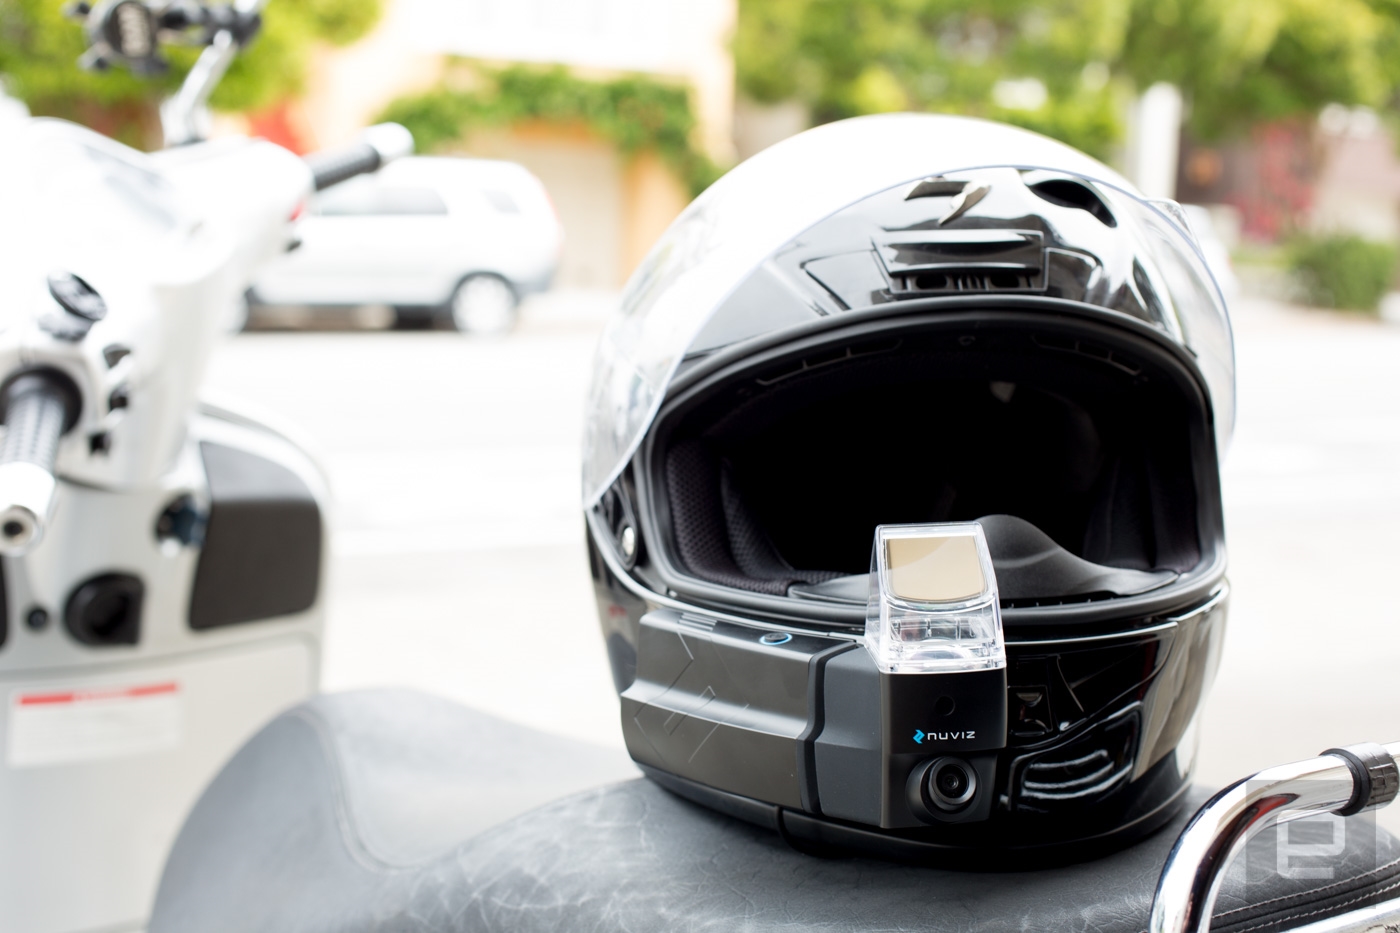 Motorcycle helmets finally get decent heads-up display navigation | DeviceDaily.com